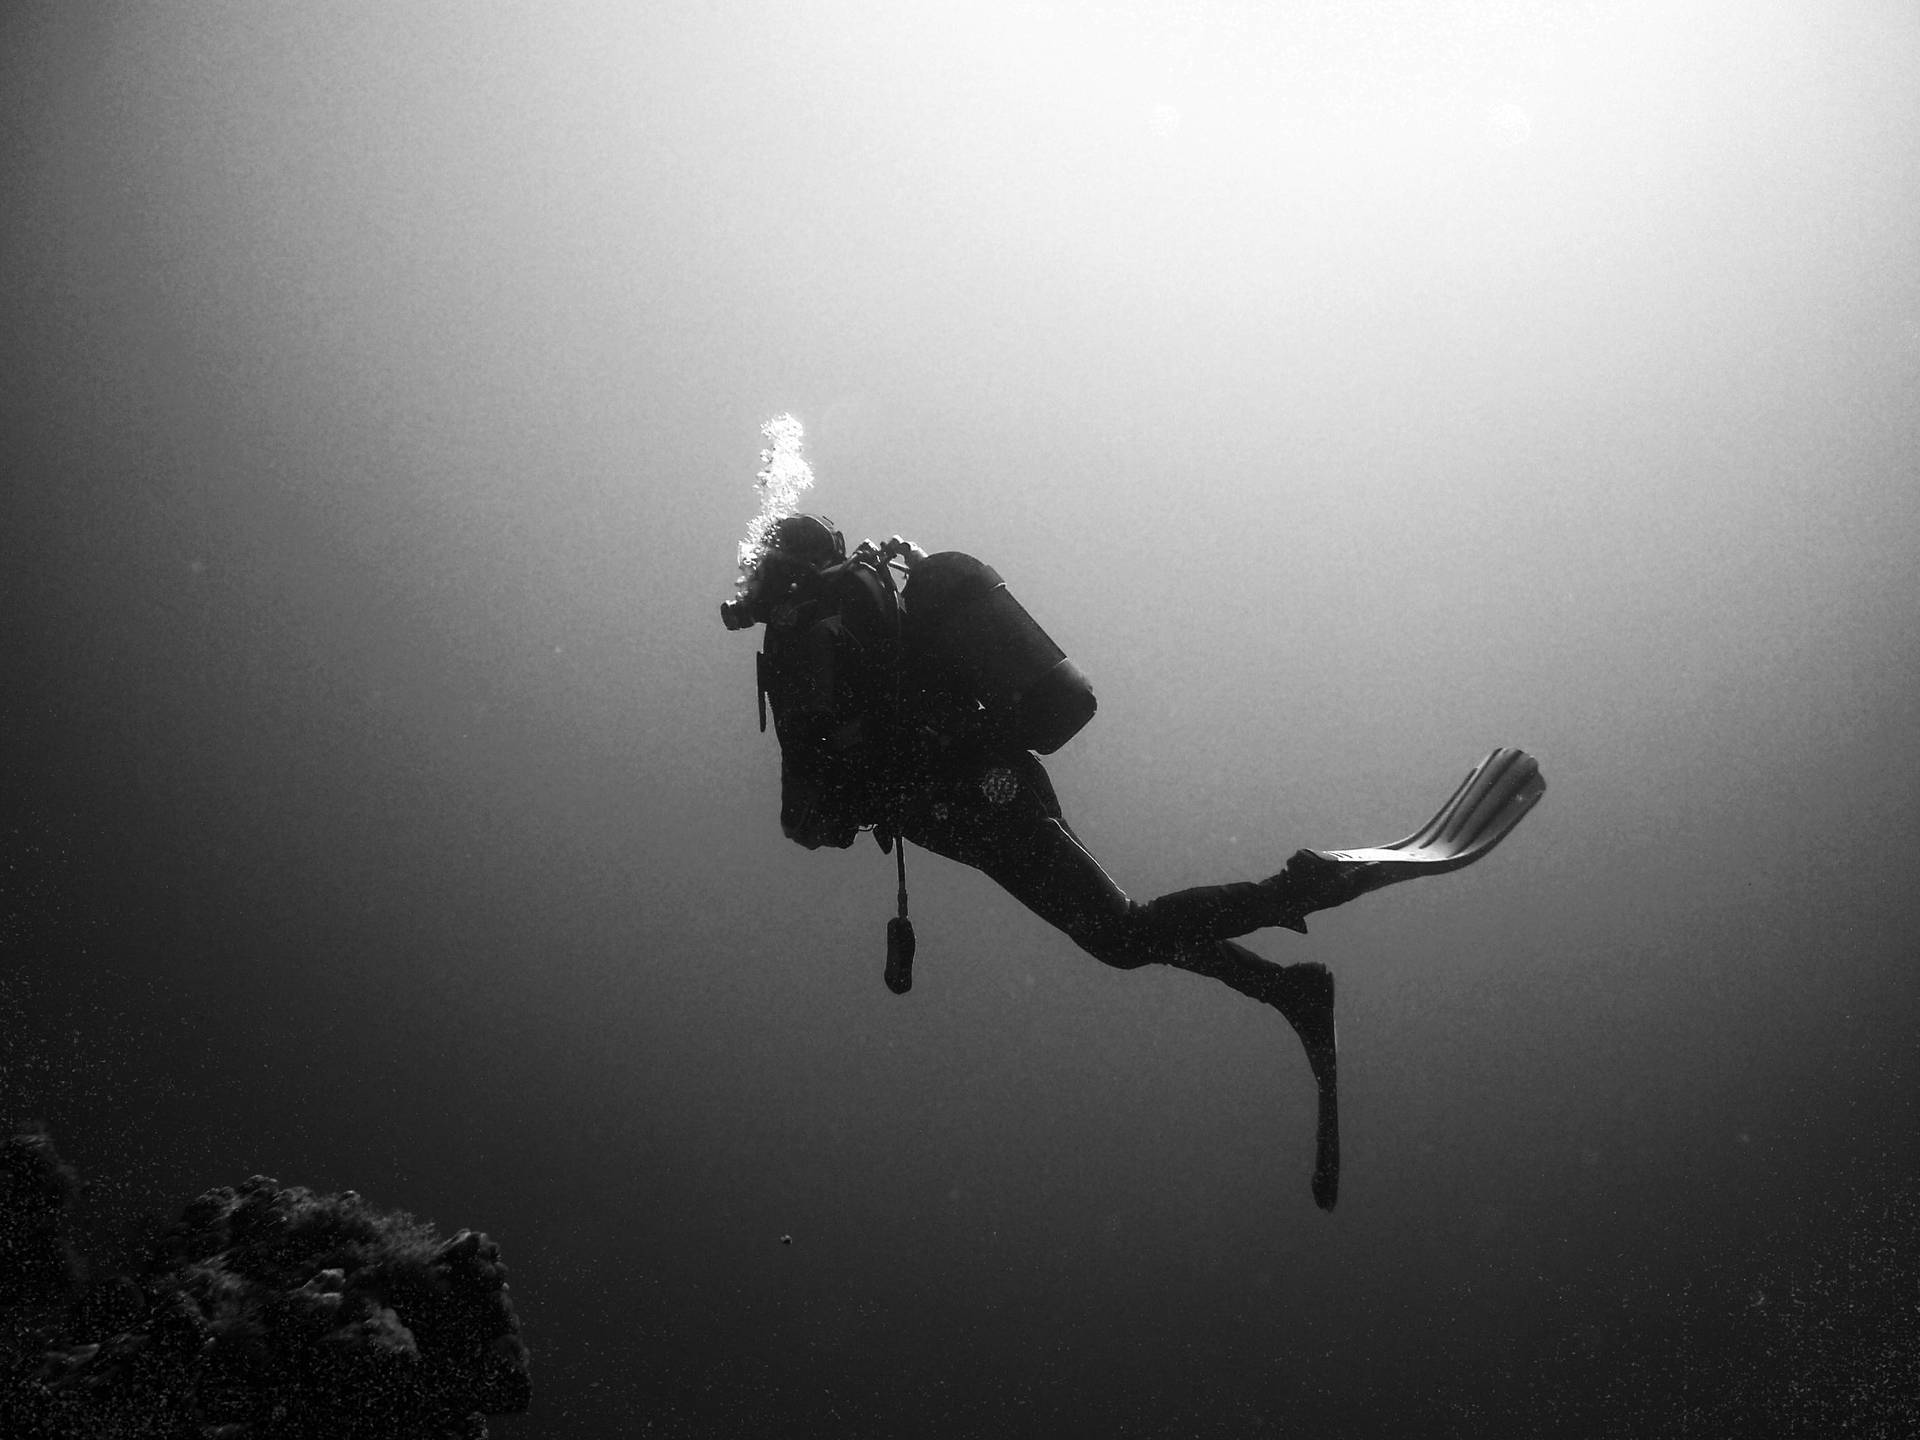 Scuba Diving Black And White Background